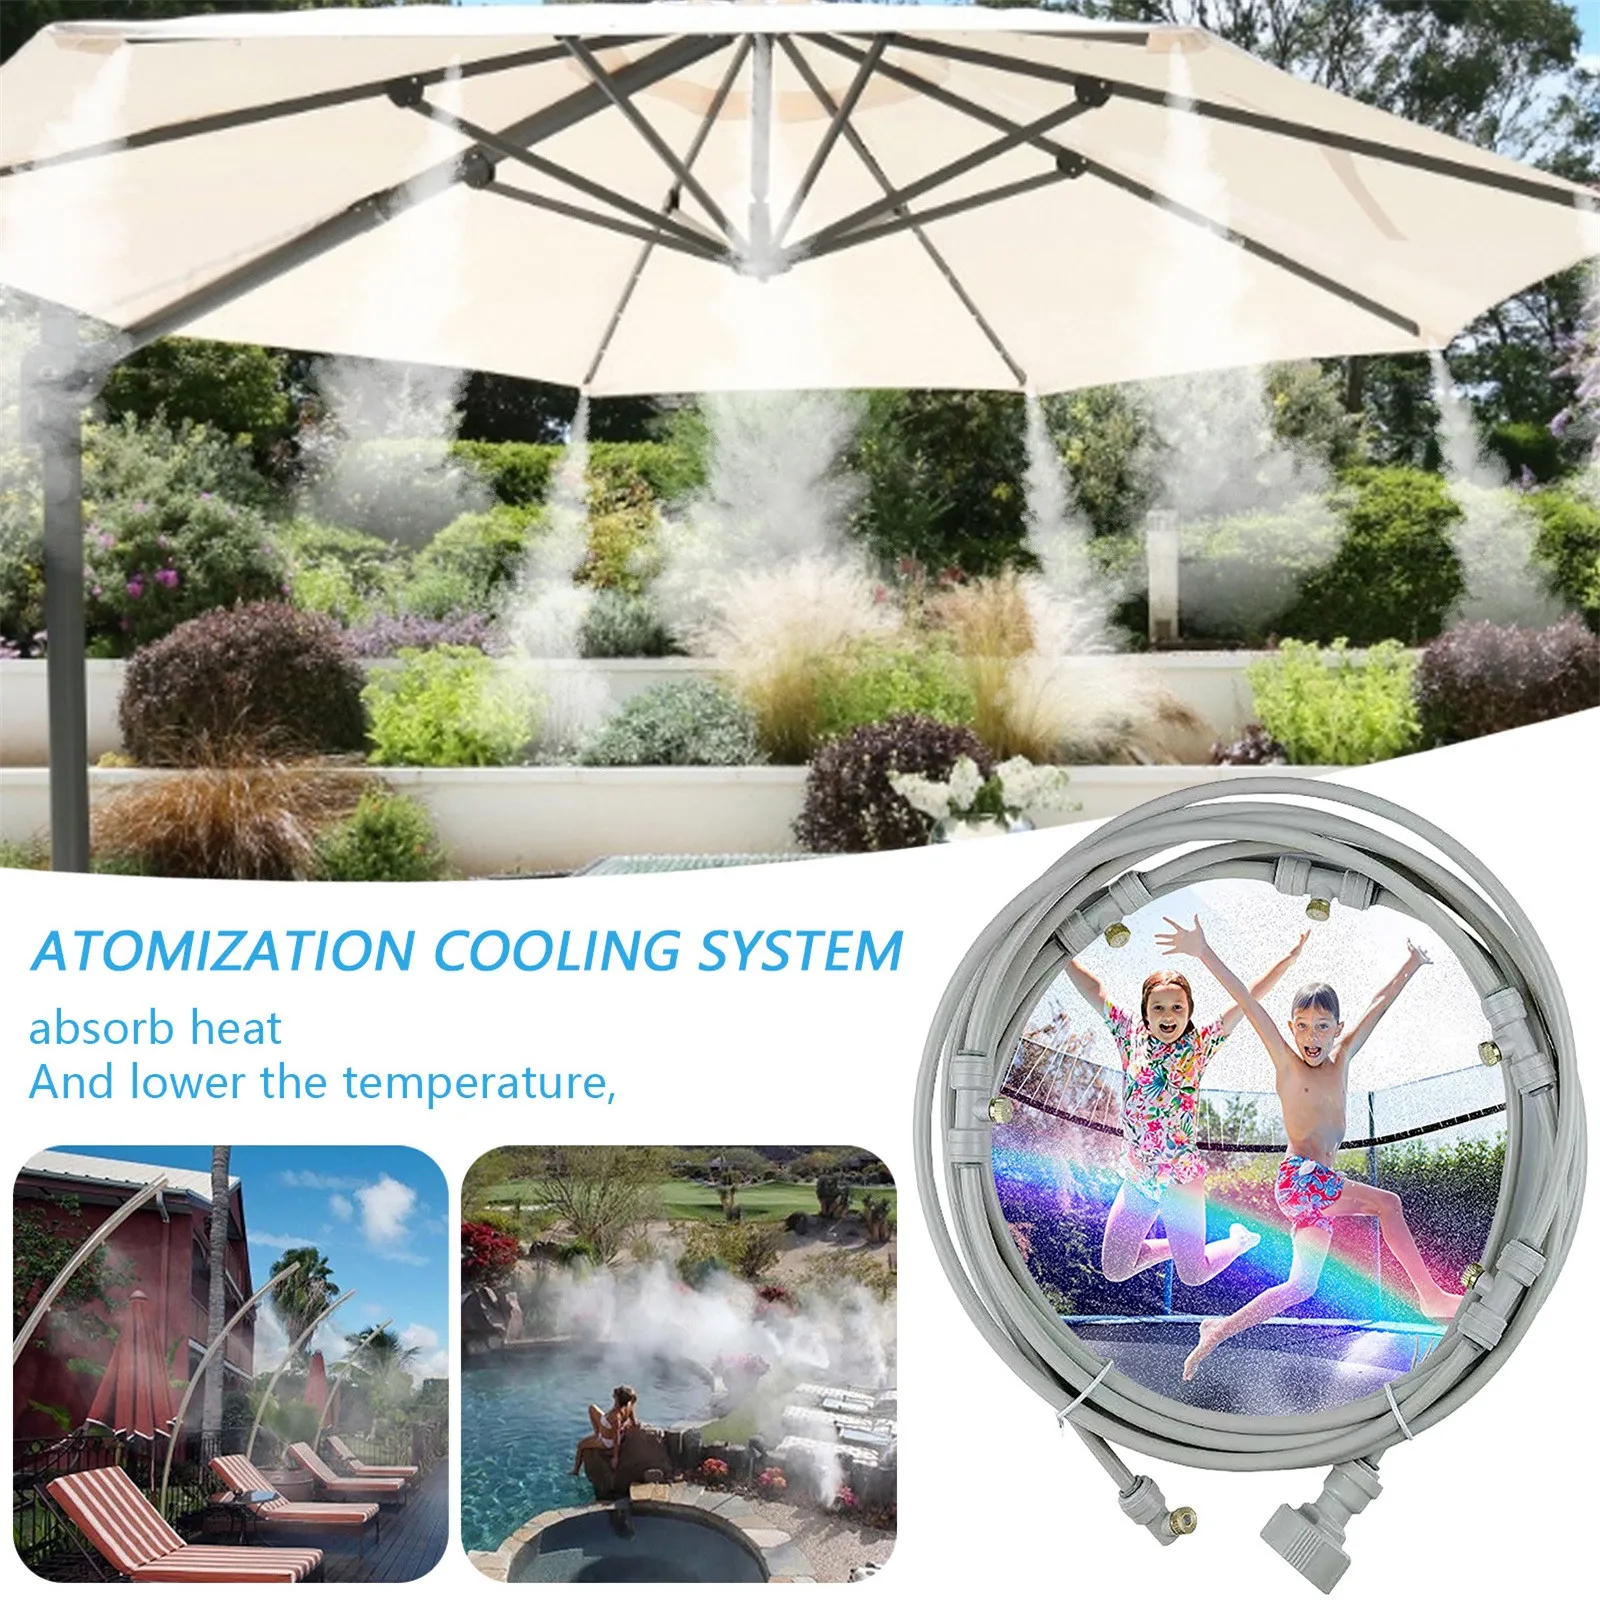 GREENHOUSE MIST OUTDOOR PATIO WATER MISTING SYSTEM KIT COOLING GREEN HOUSE 3M 